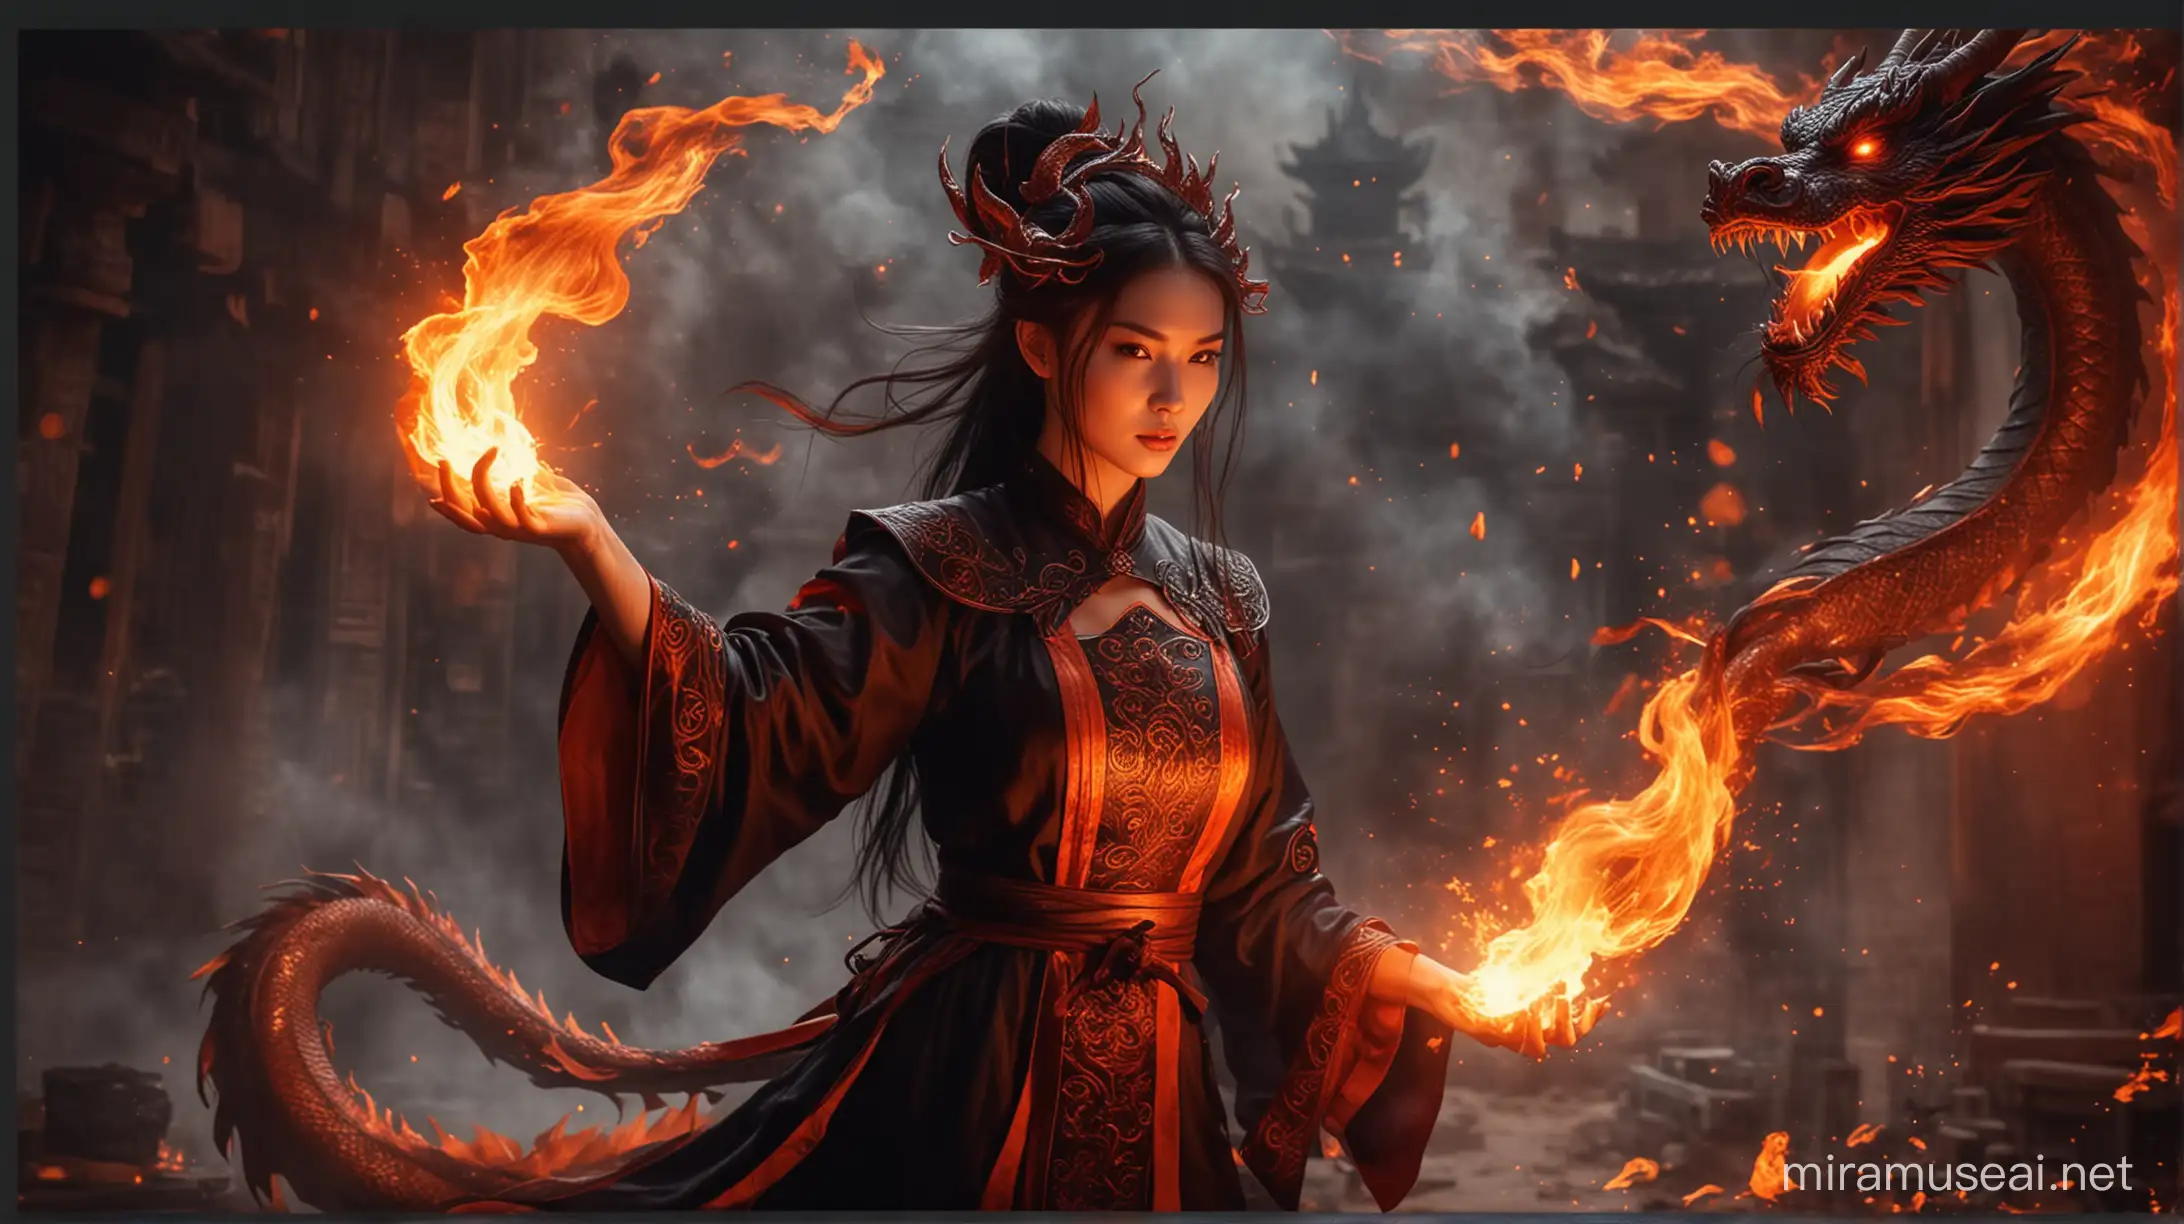 witch magic woman  fire
chinese dragon background 
hand of fire